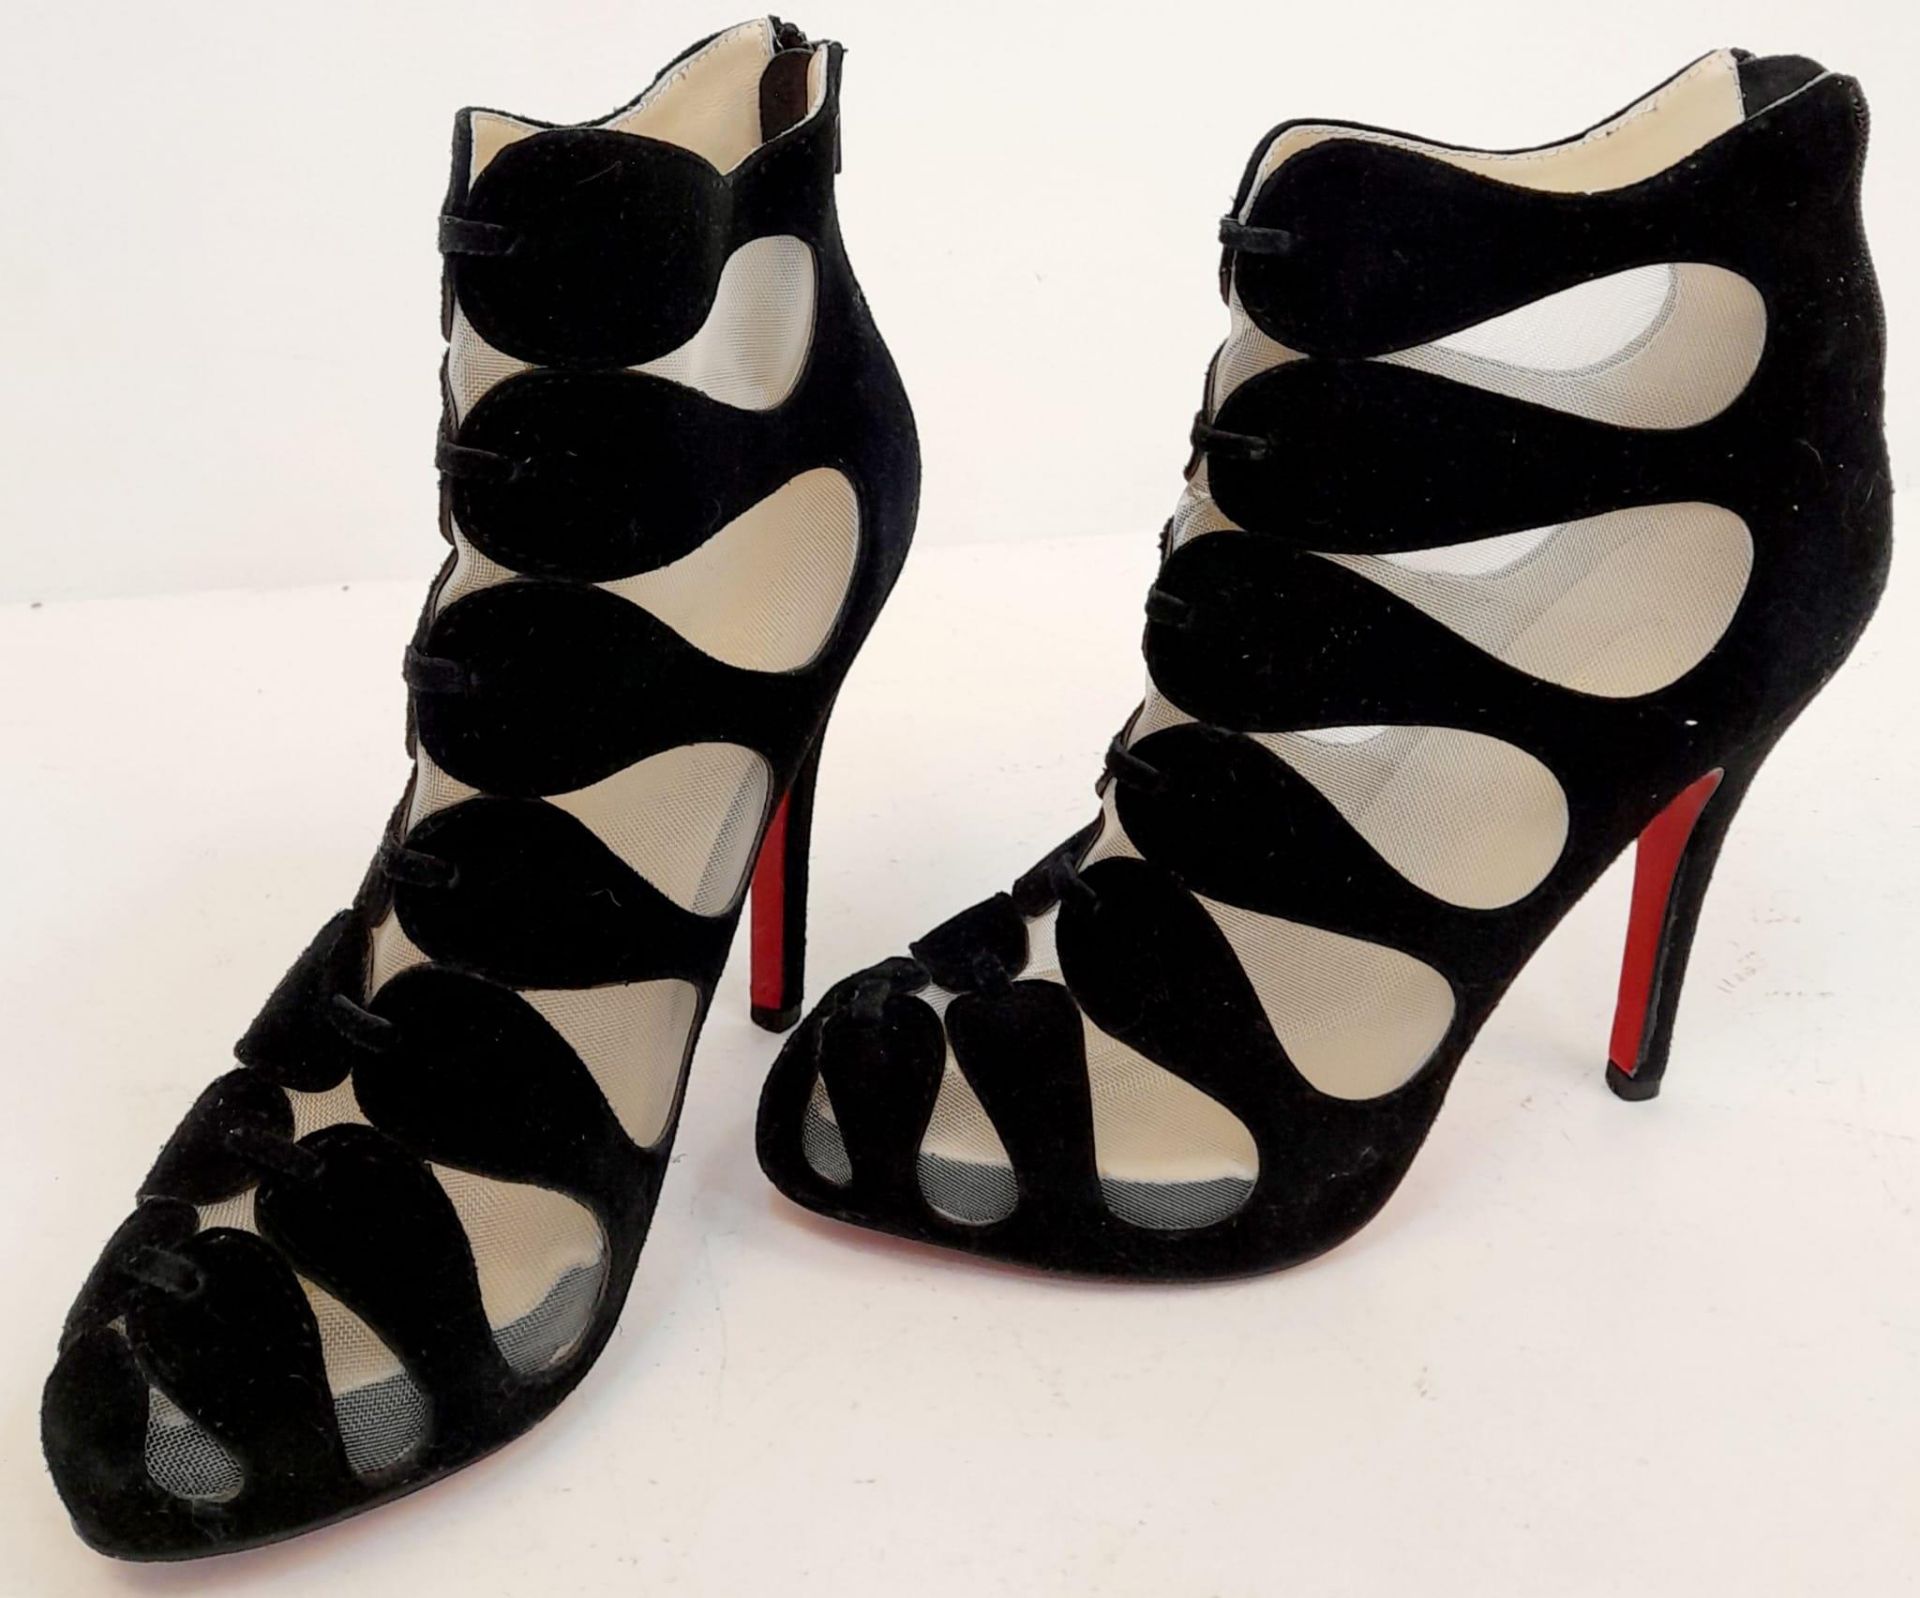 A pair of Louboutin high heels "see through" in black suede, lightly used. Size 40.